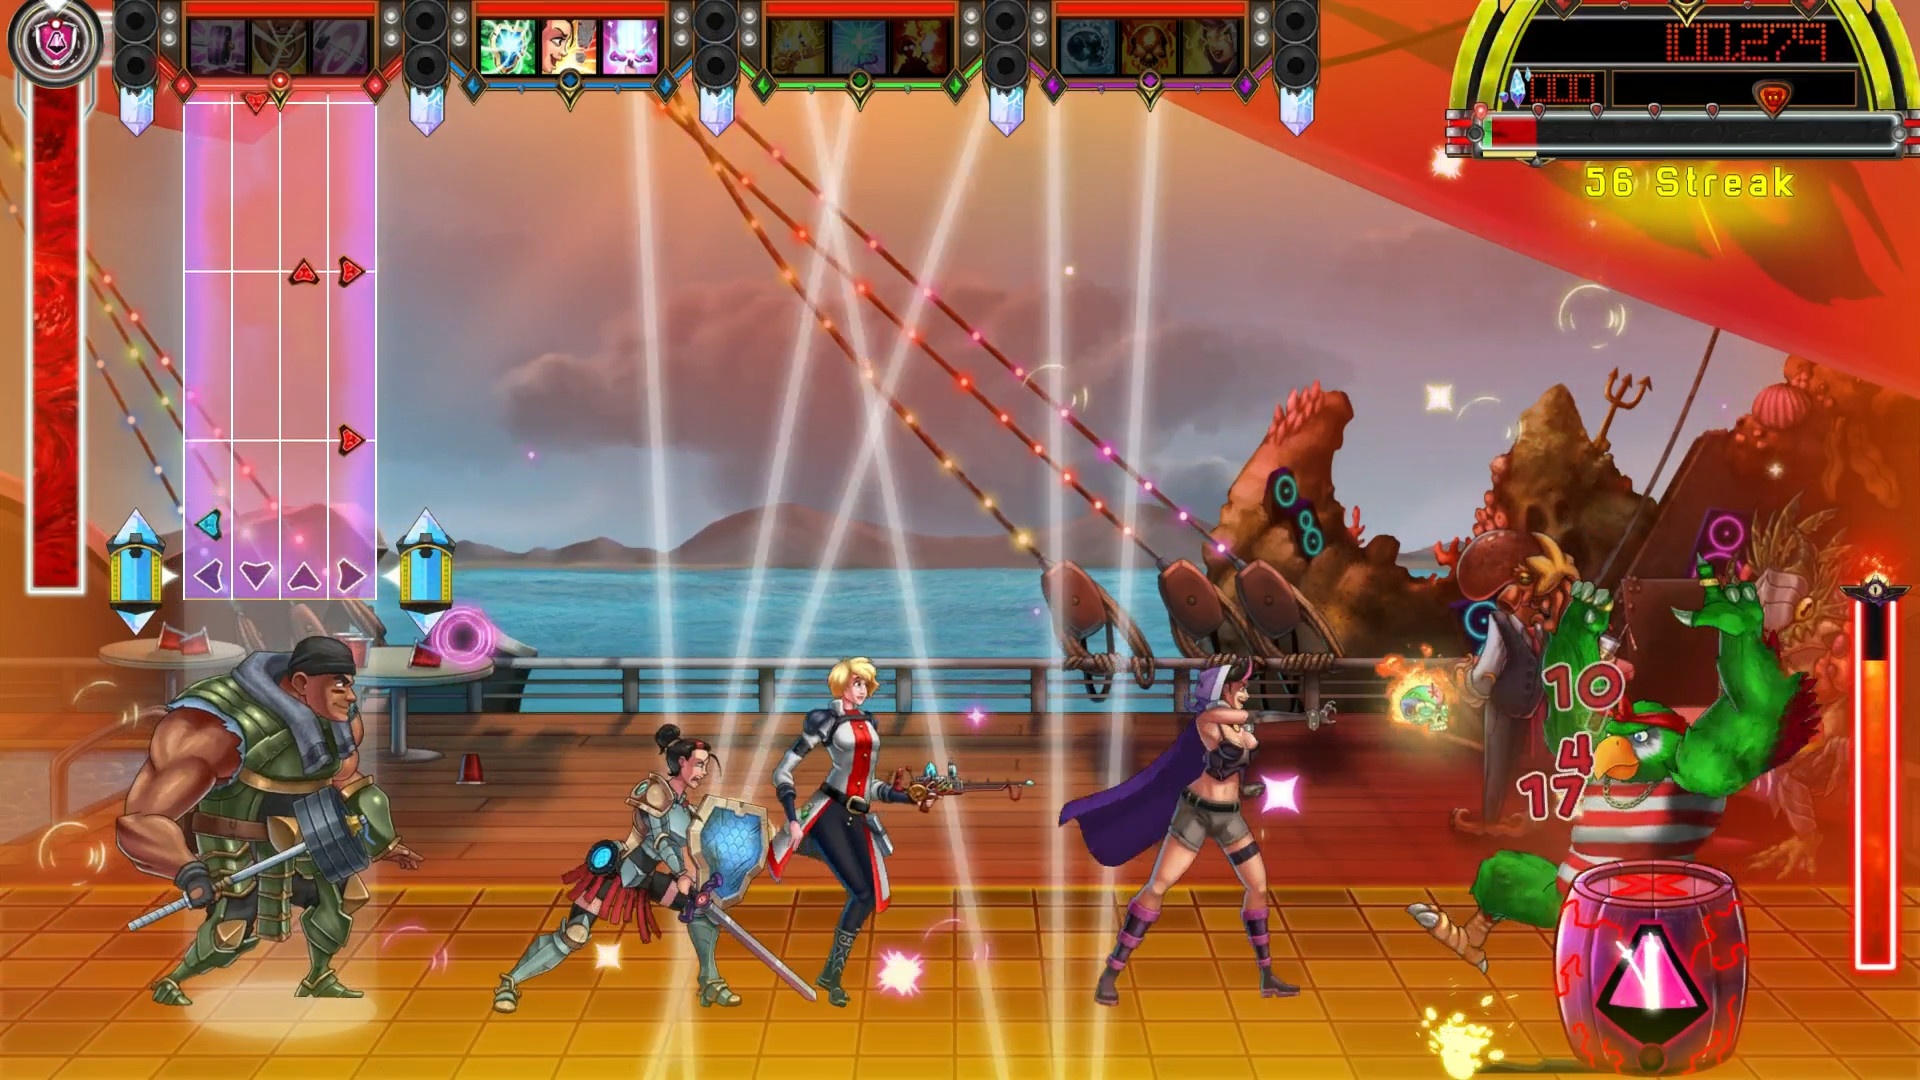 The Metronomicon download the last version for windows